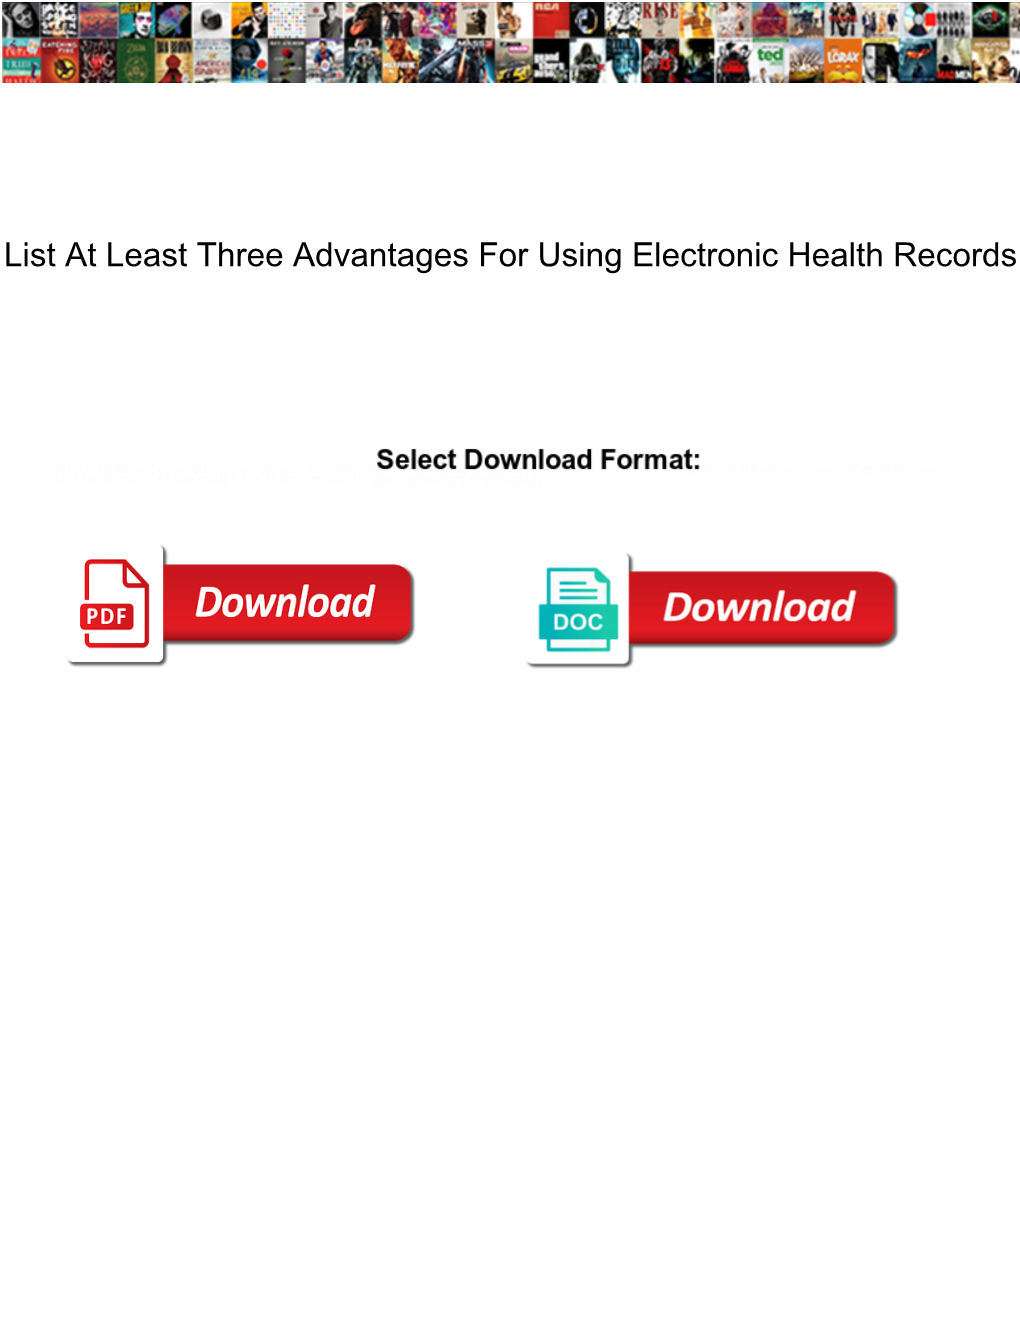 List at Least Three Advantages for Using Electronic Health Records